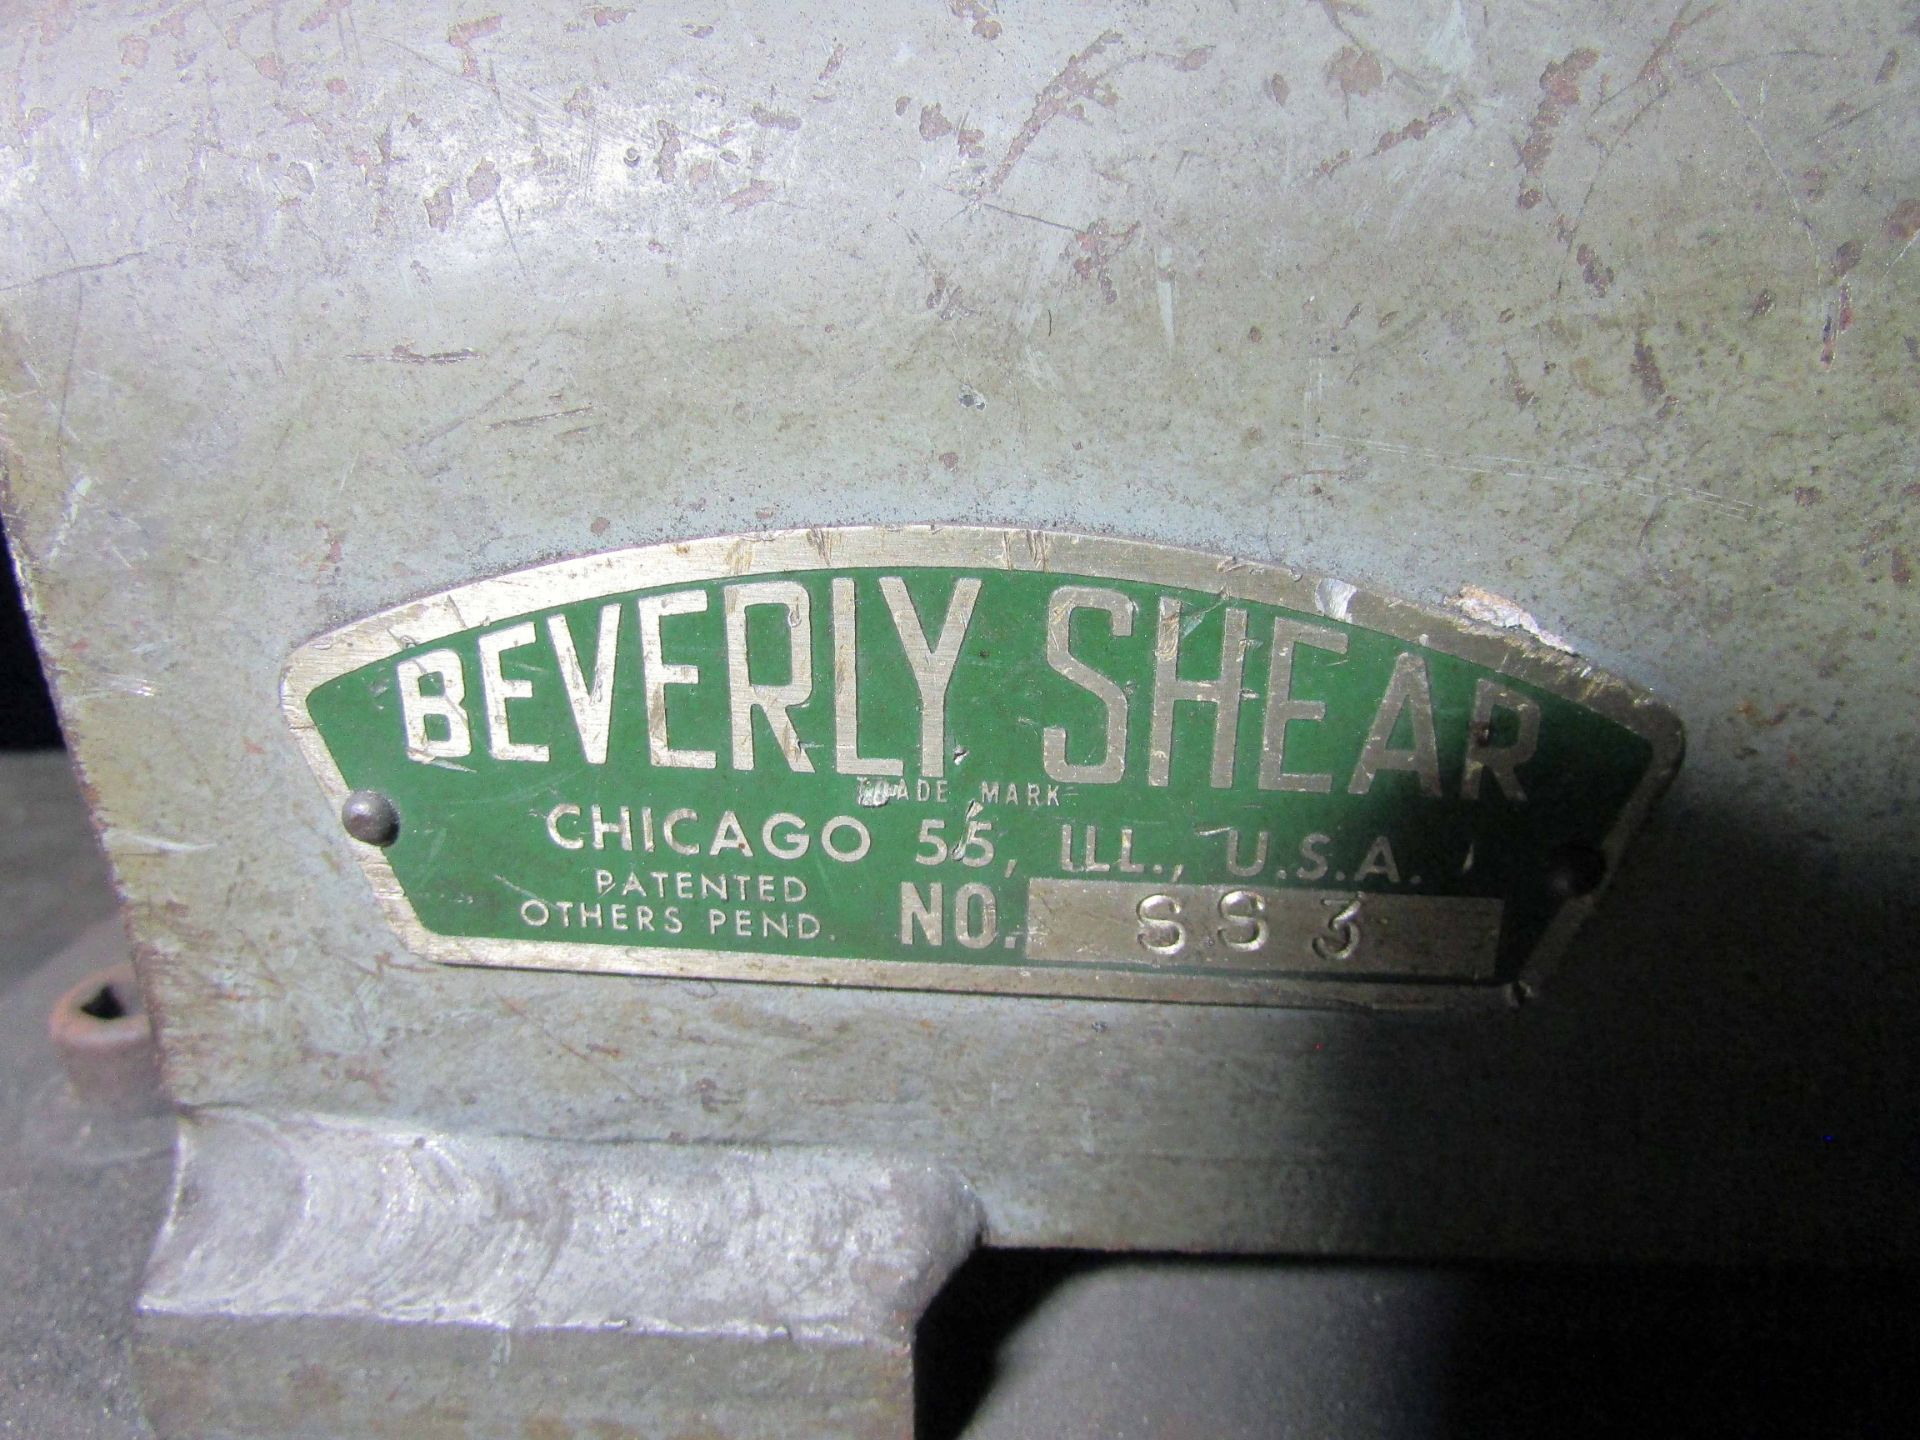 BENCHTOP MANUAL SHEAR, BEVERLY SHEAR MDL. NO. SS3, w/ table - Image 4 of 4